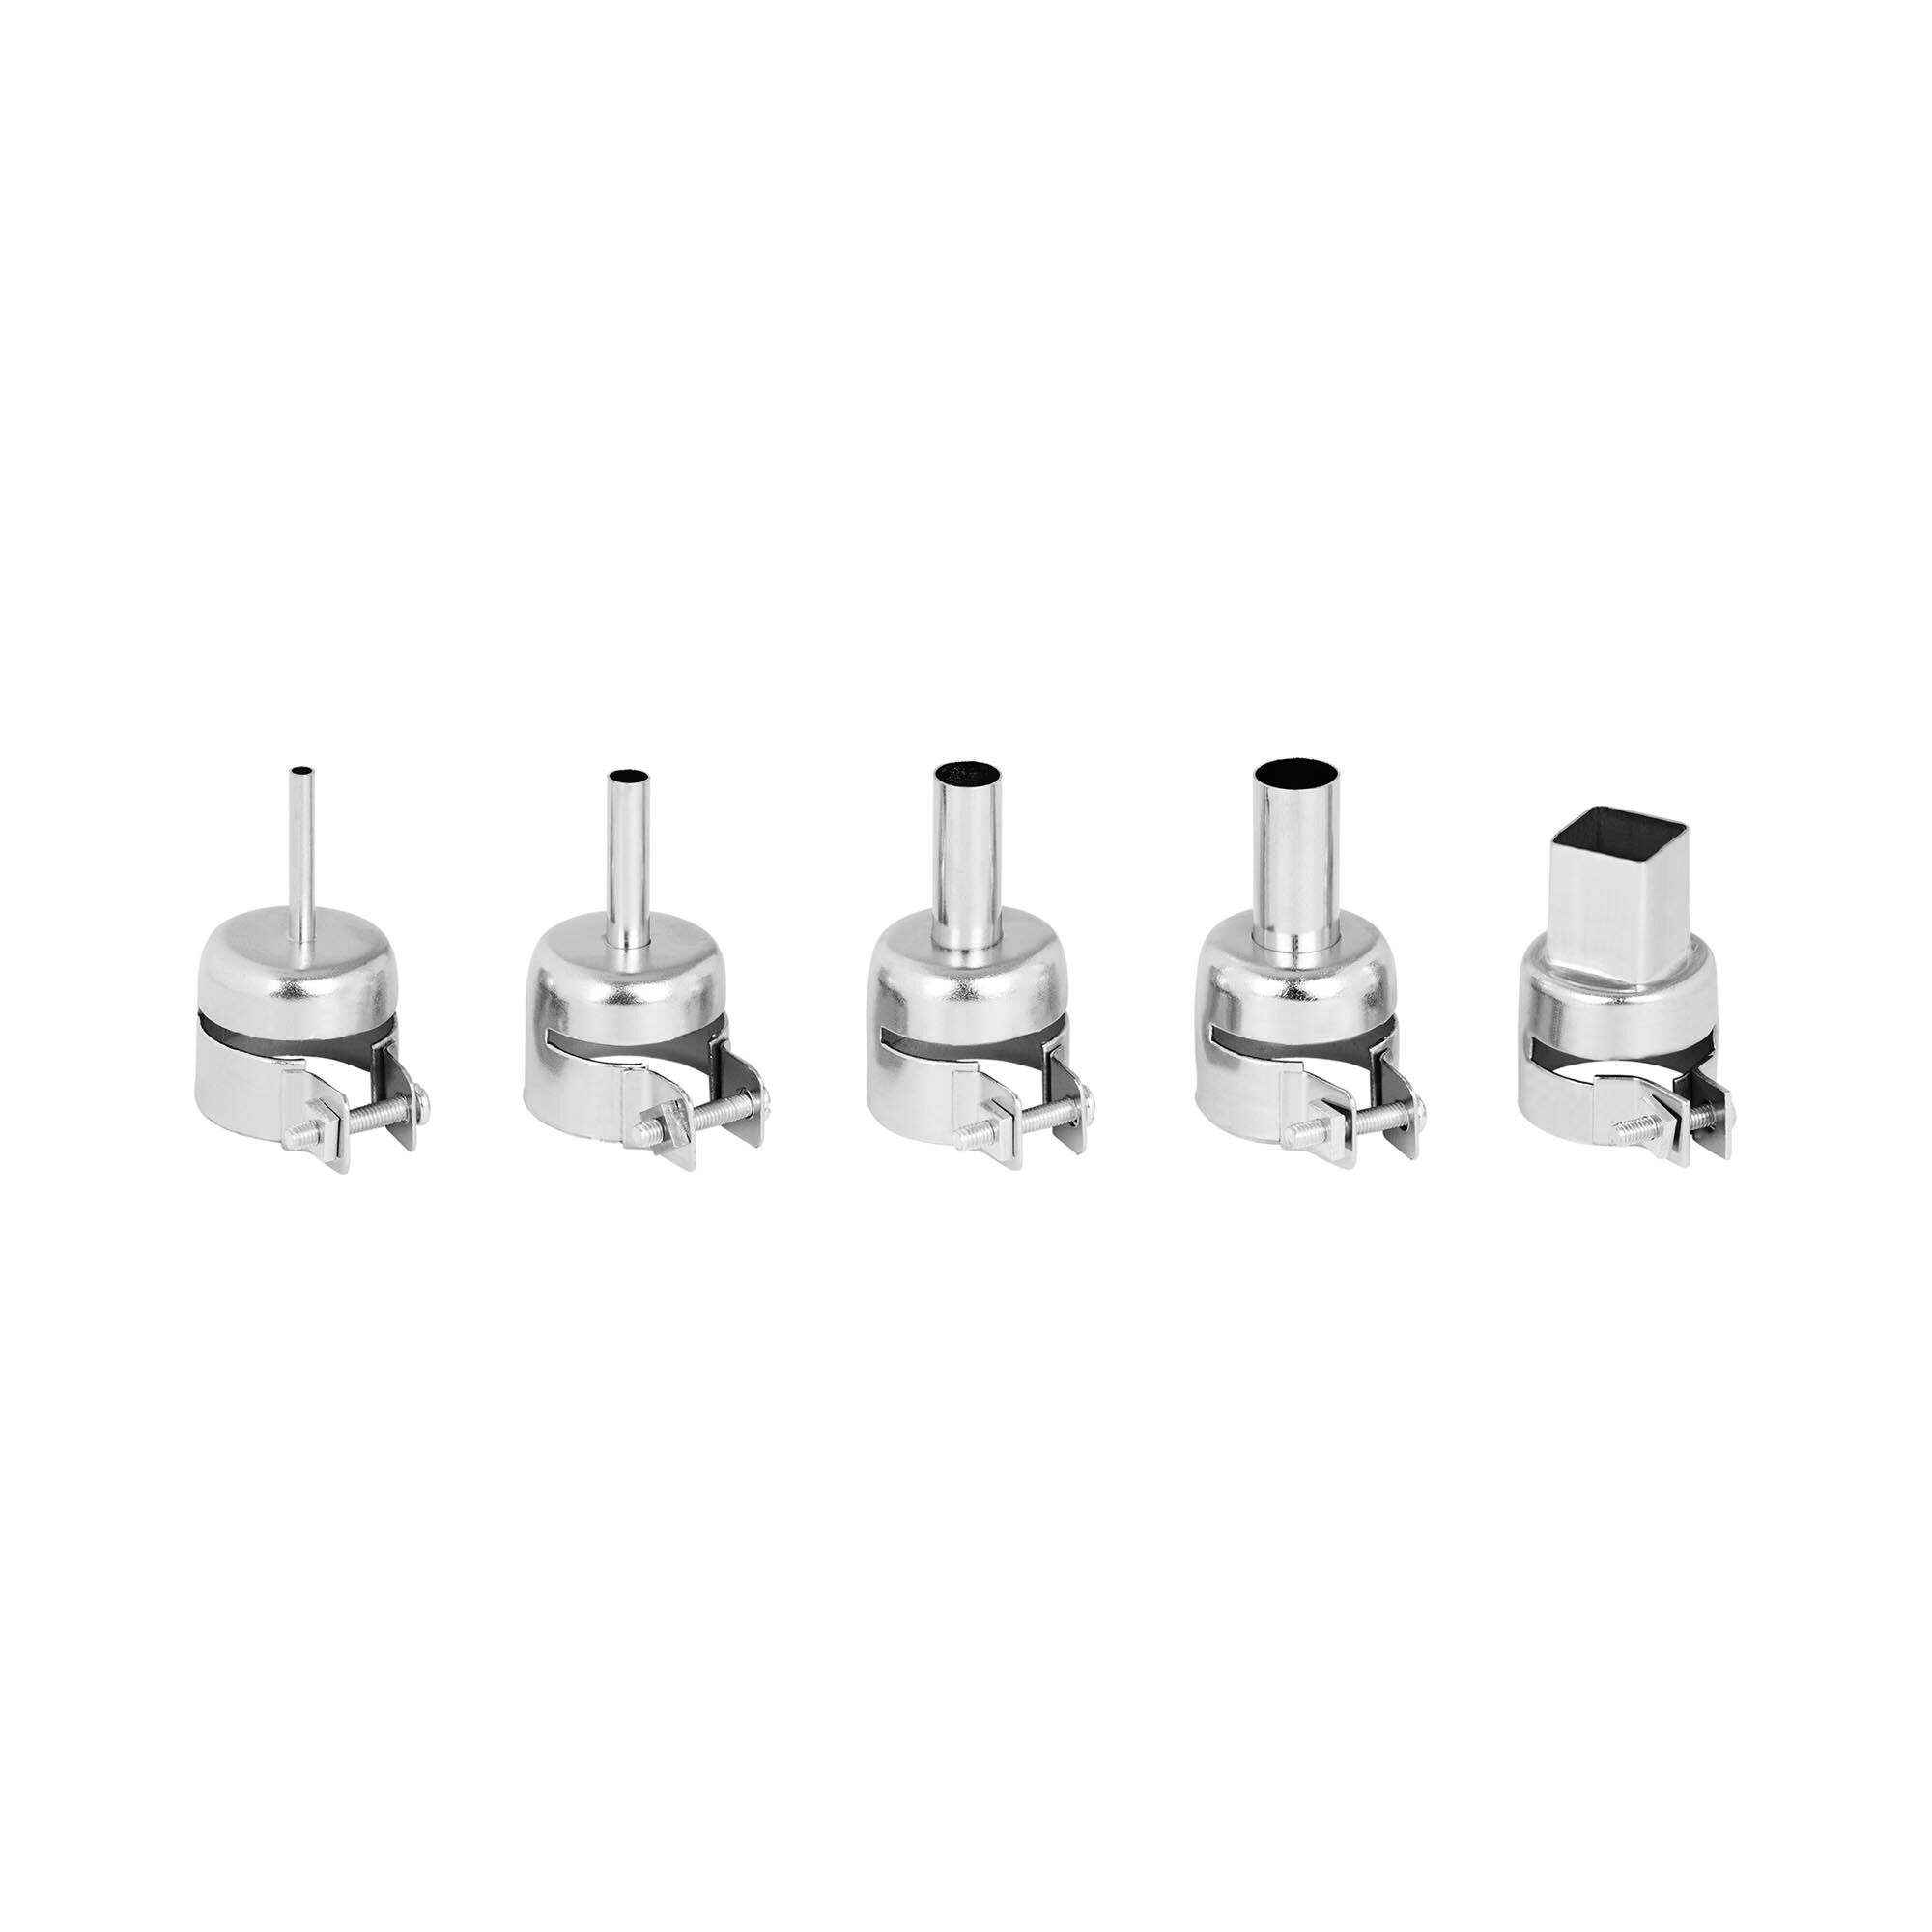 Stamos Soldering Set of 5 Hot Air Nozzles